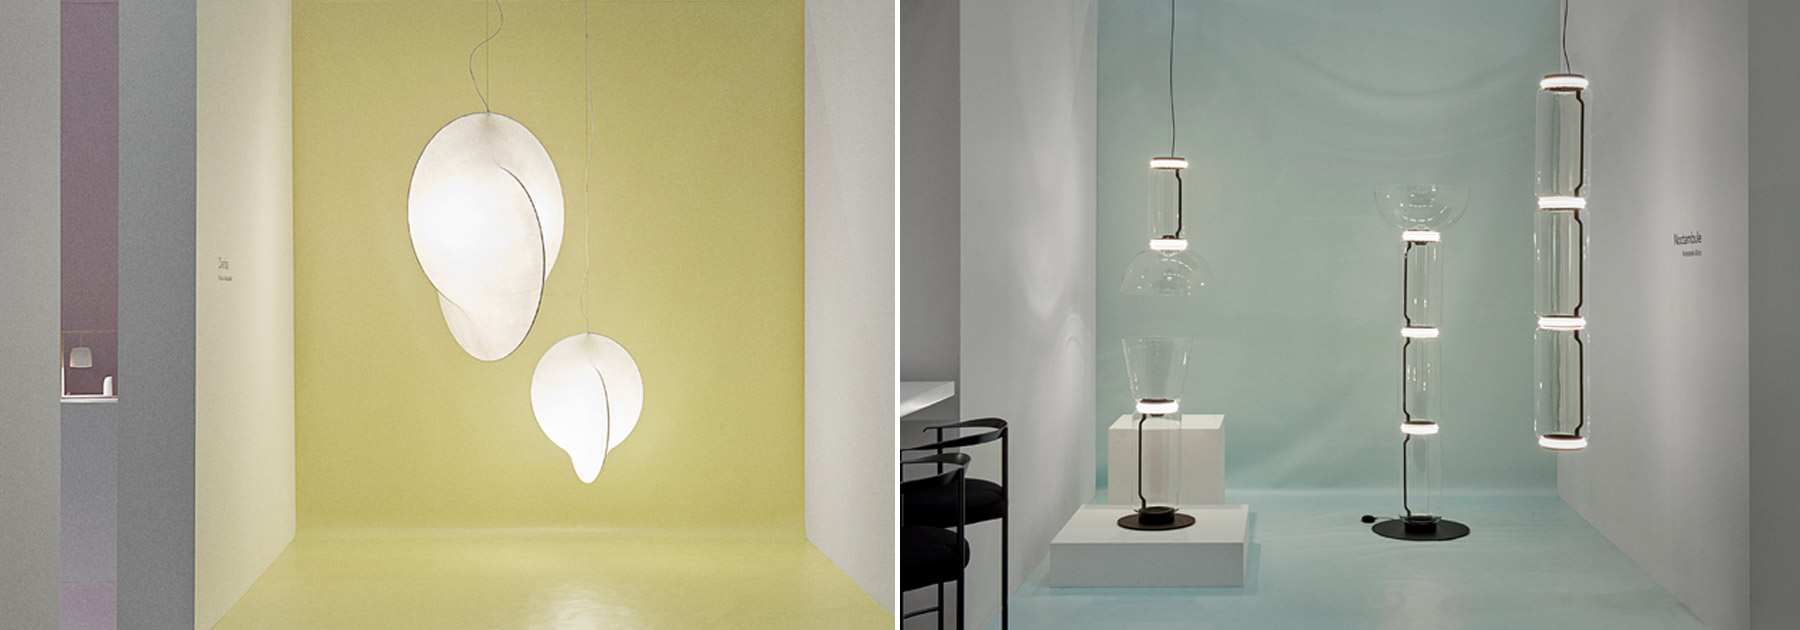 flos new lighting projects by konstantin grcic, michael anastassiades and nendo